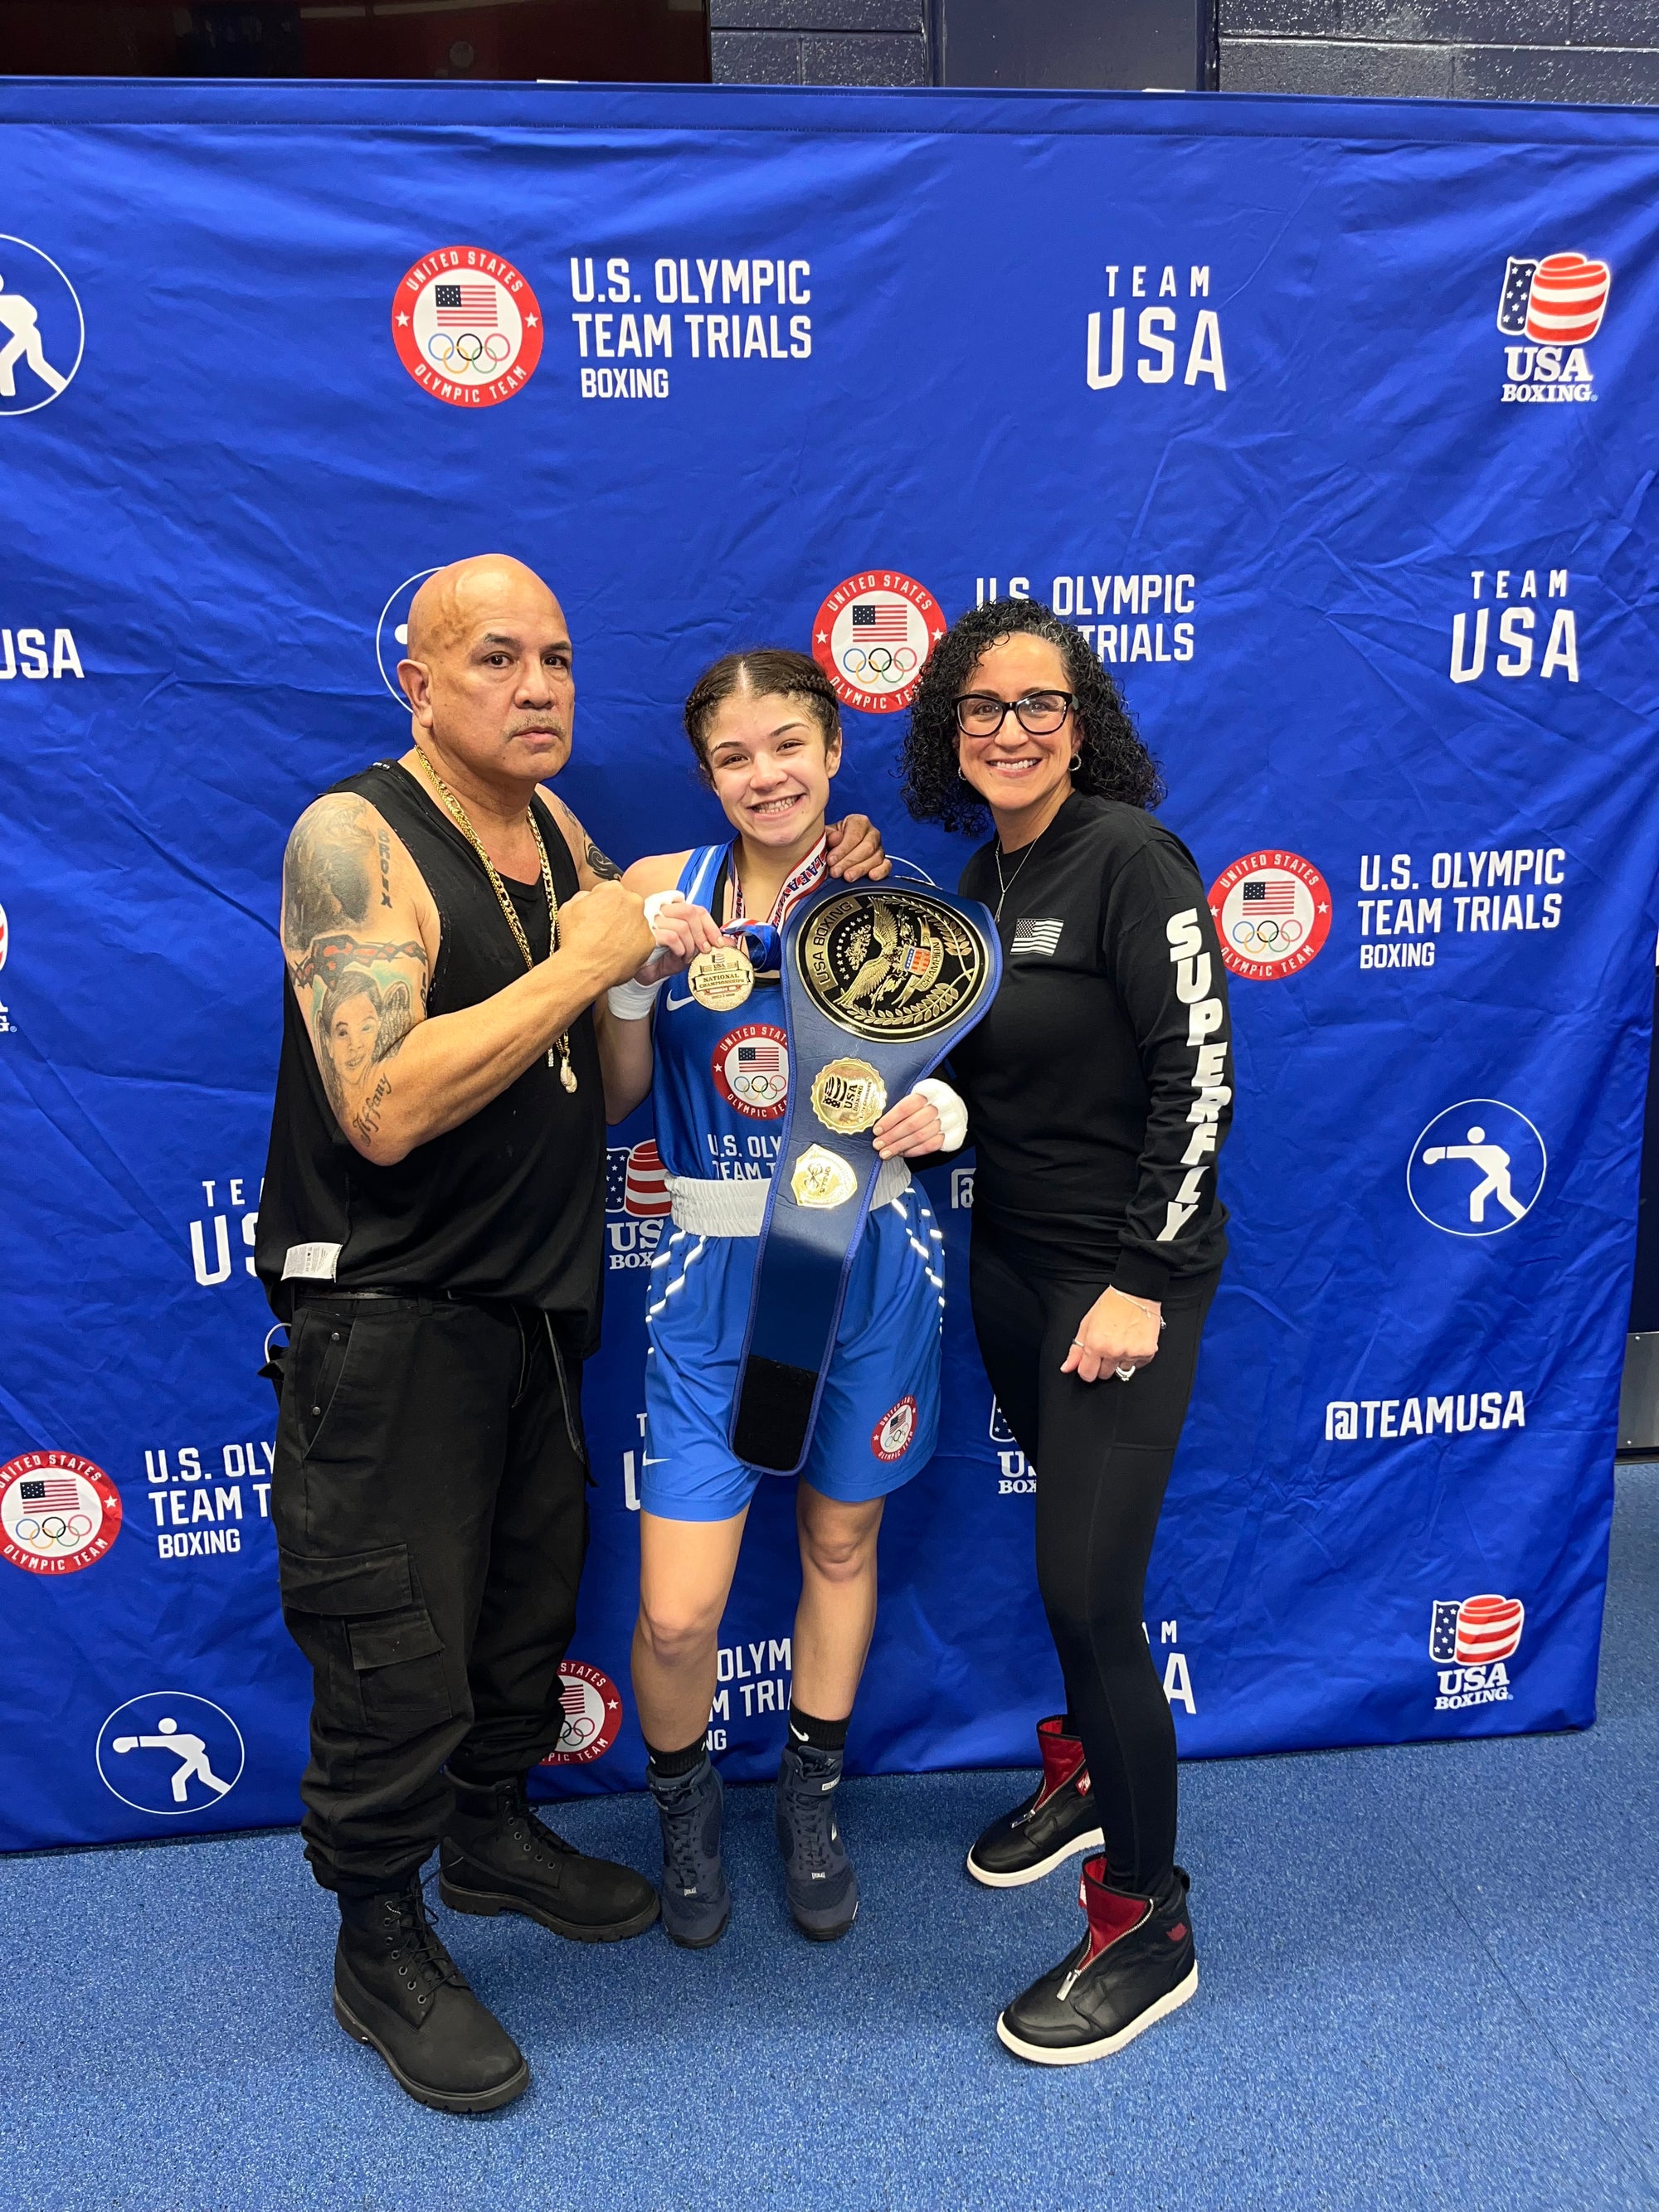 Boxer Sierra Martinez, a Rhode Island native, hopes to make history this summer. Here's her plan